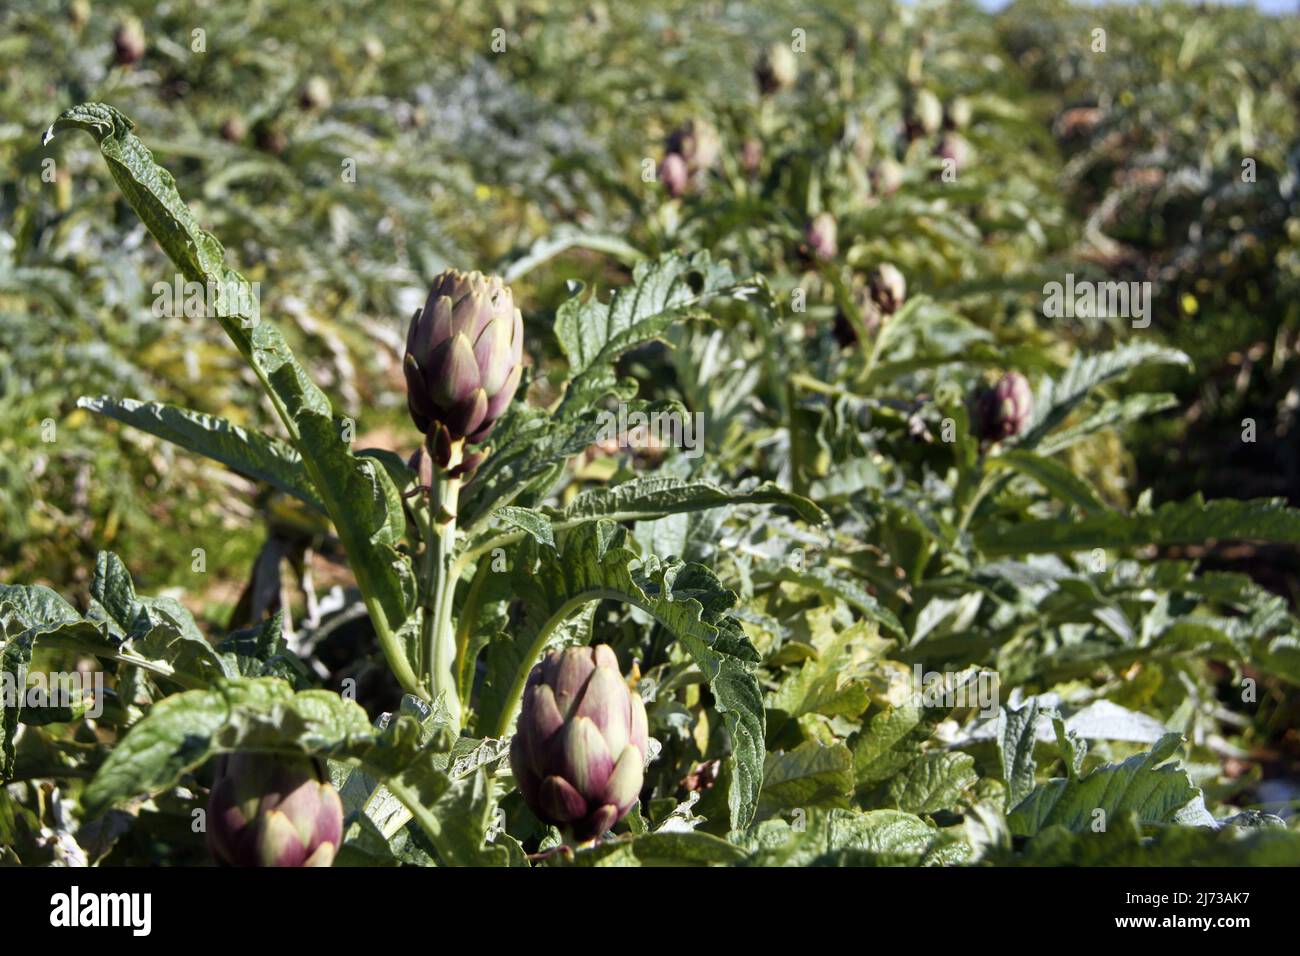 Artichoke culture in Southern Italy Stock Photo